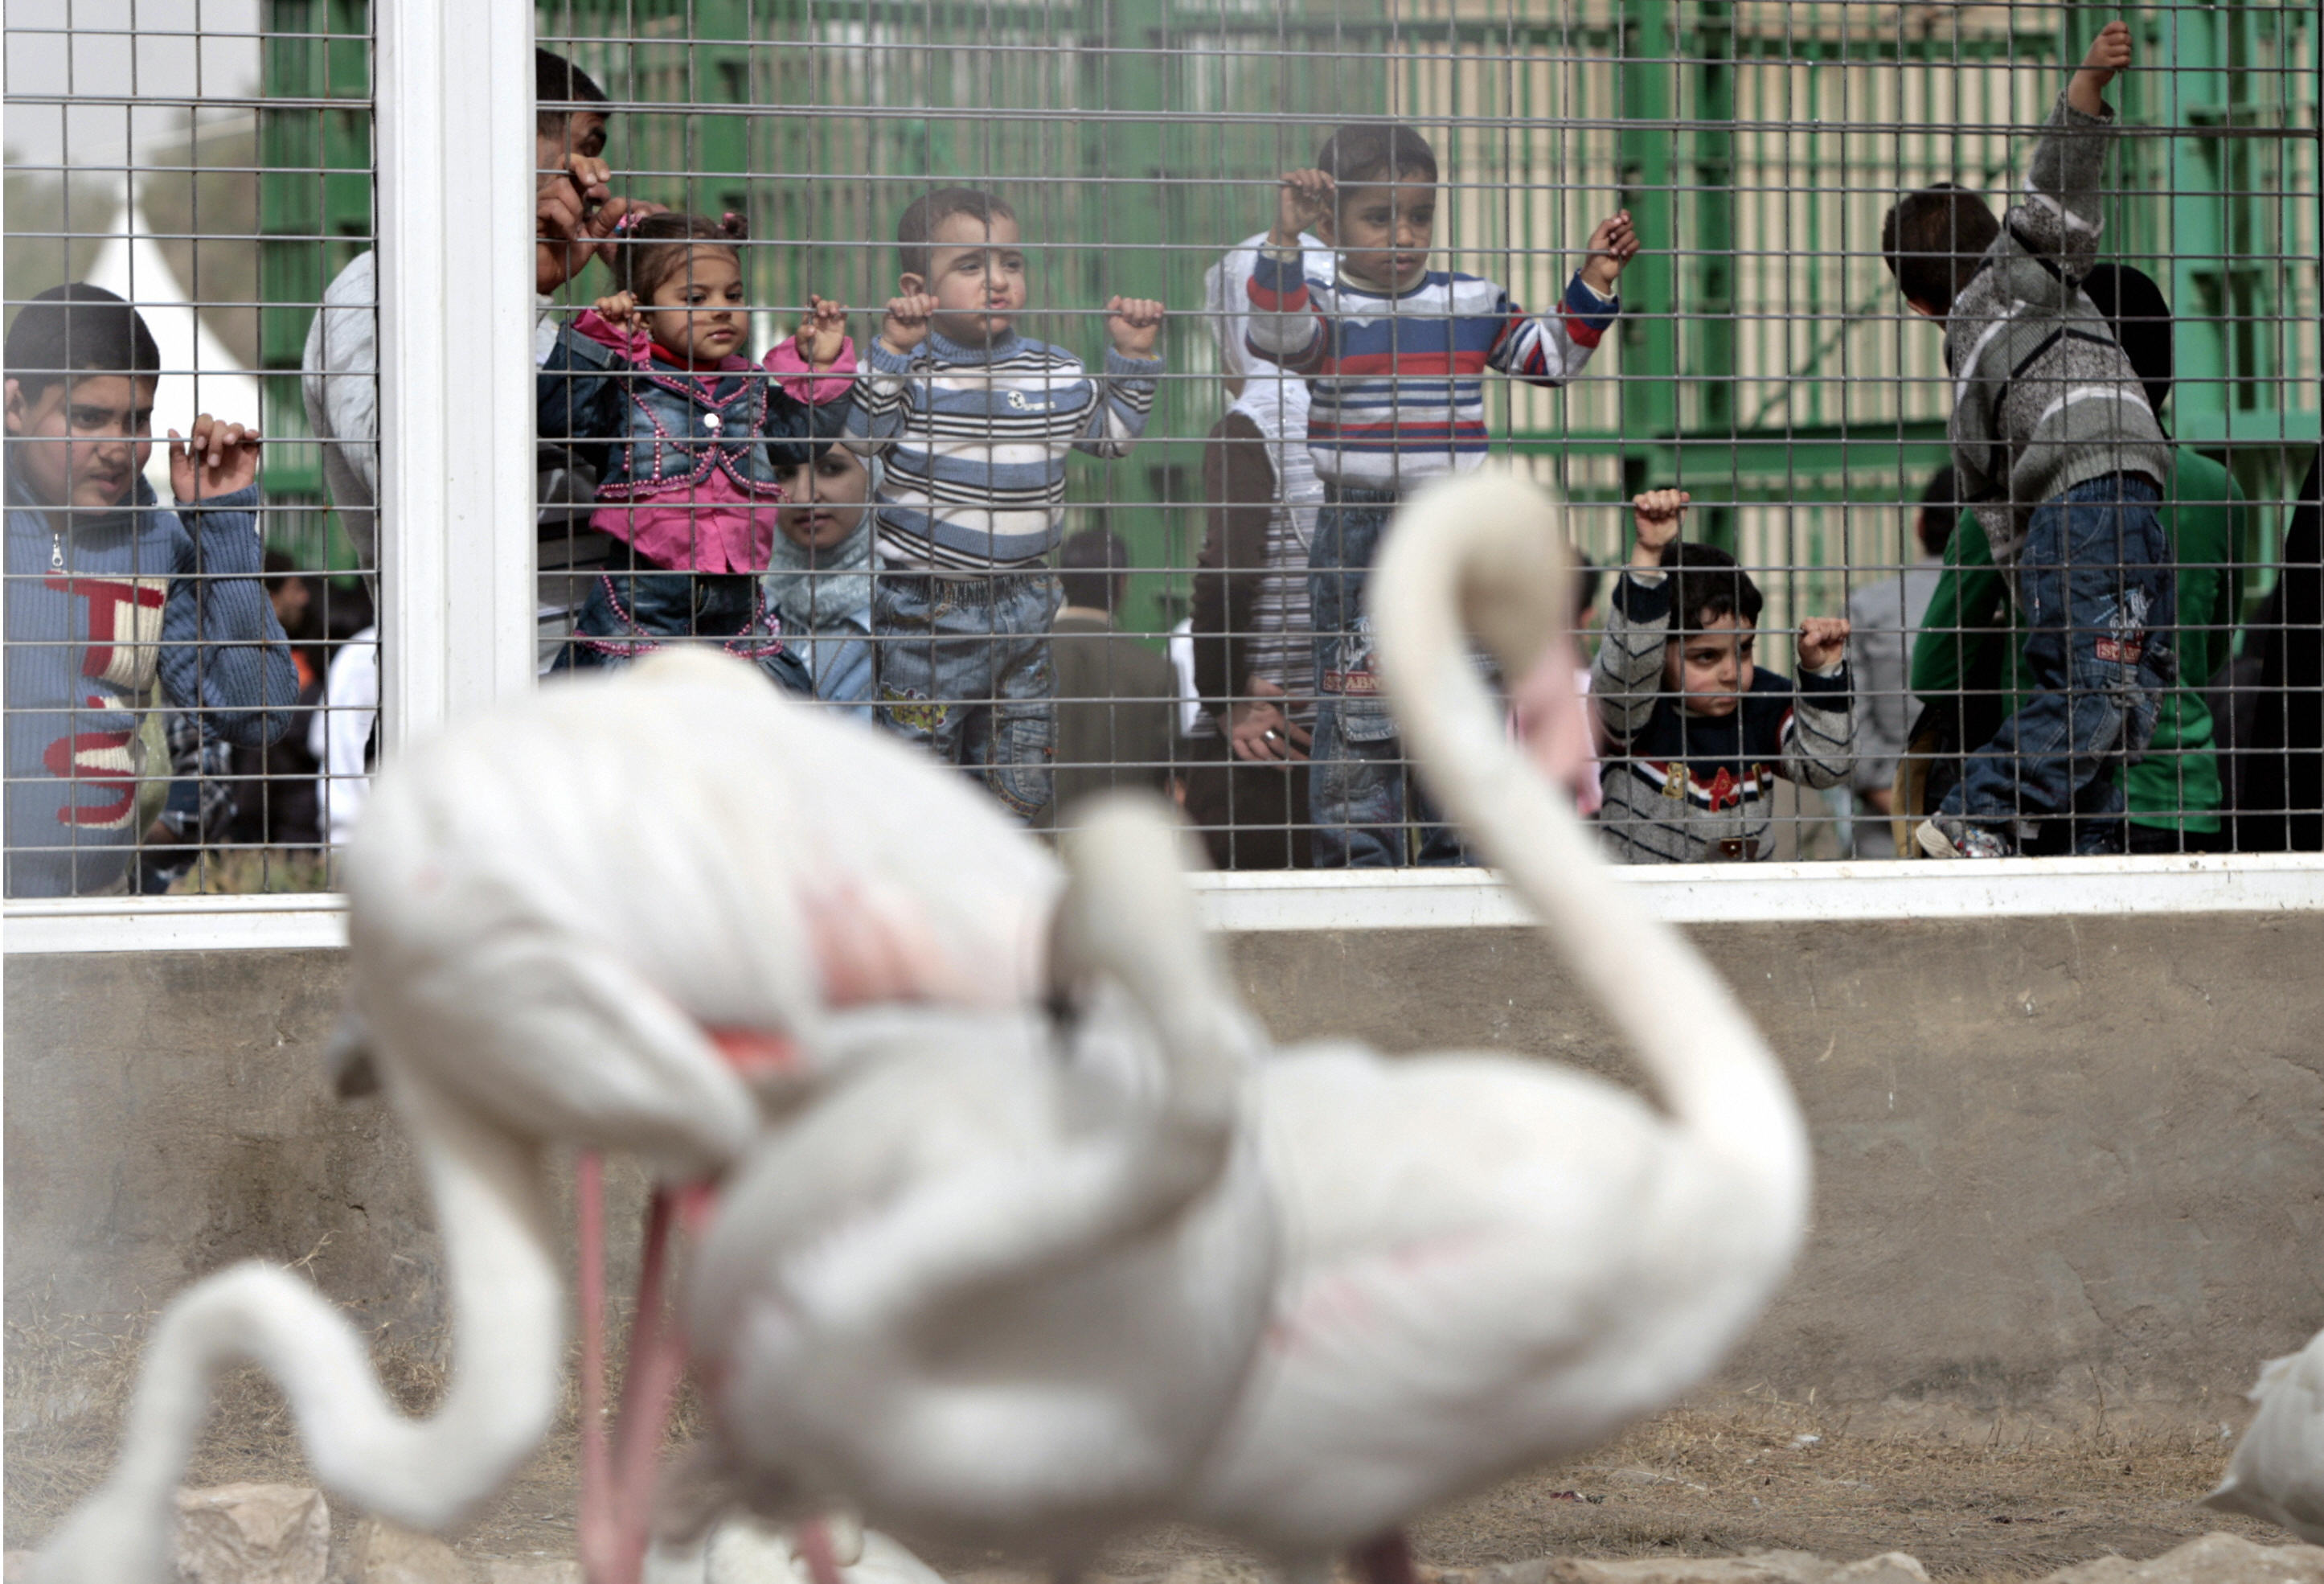 AHMAD AL-RUBAYE/AFP/Getty Images. Iraqi children stand looking at the flamingo enclosure at the Zawraa Park and Zoo.